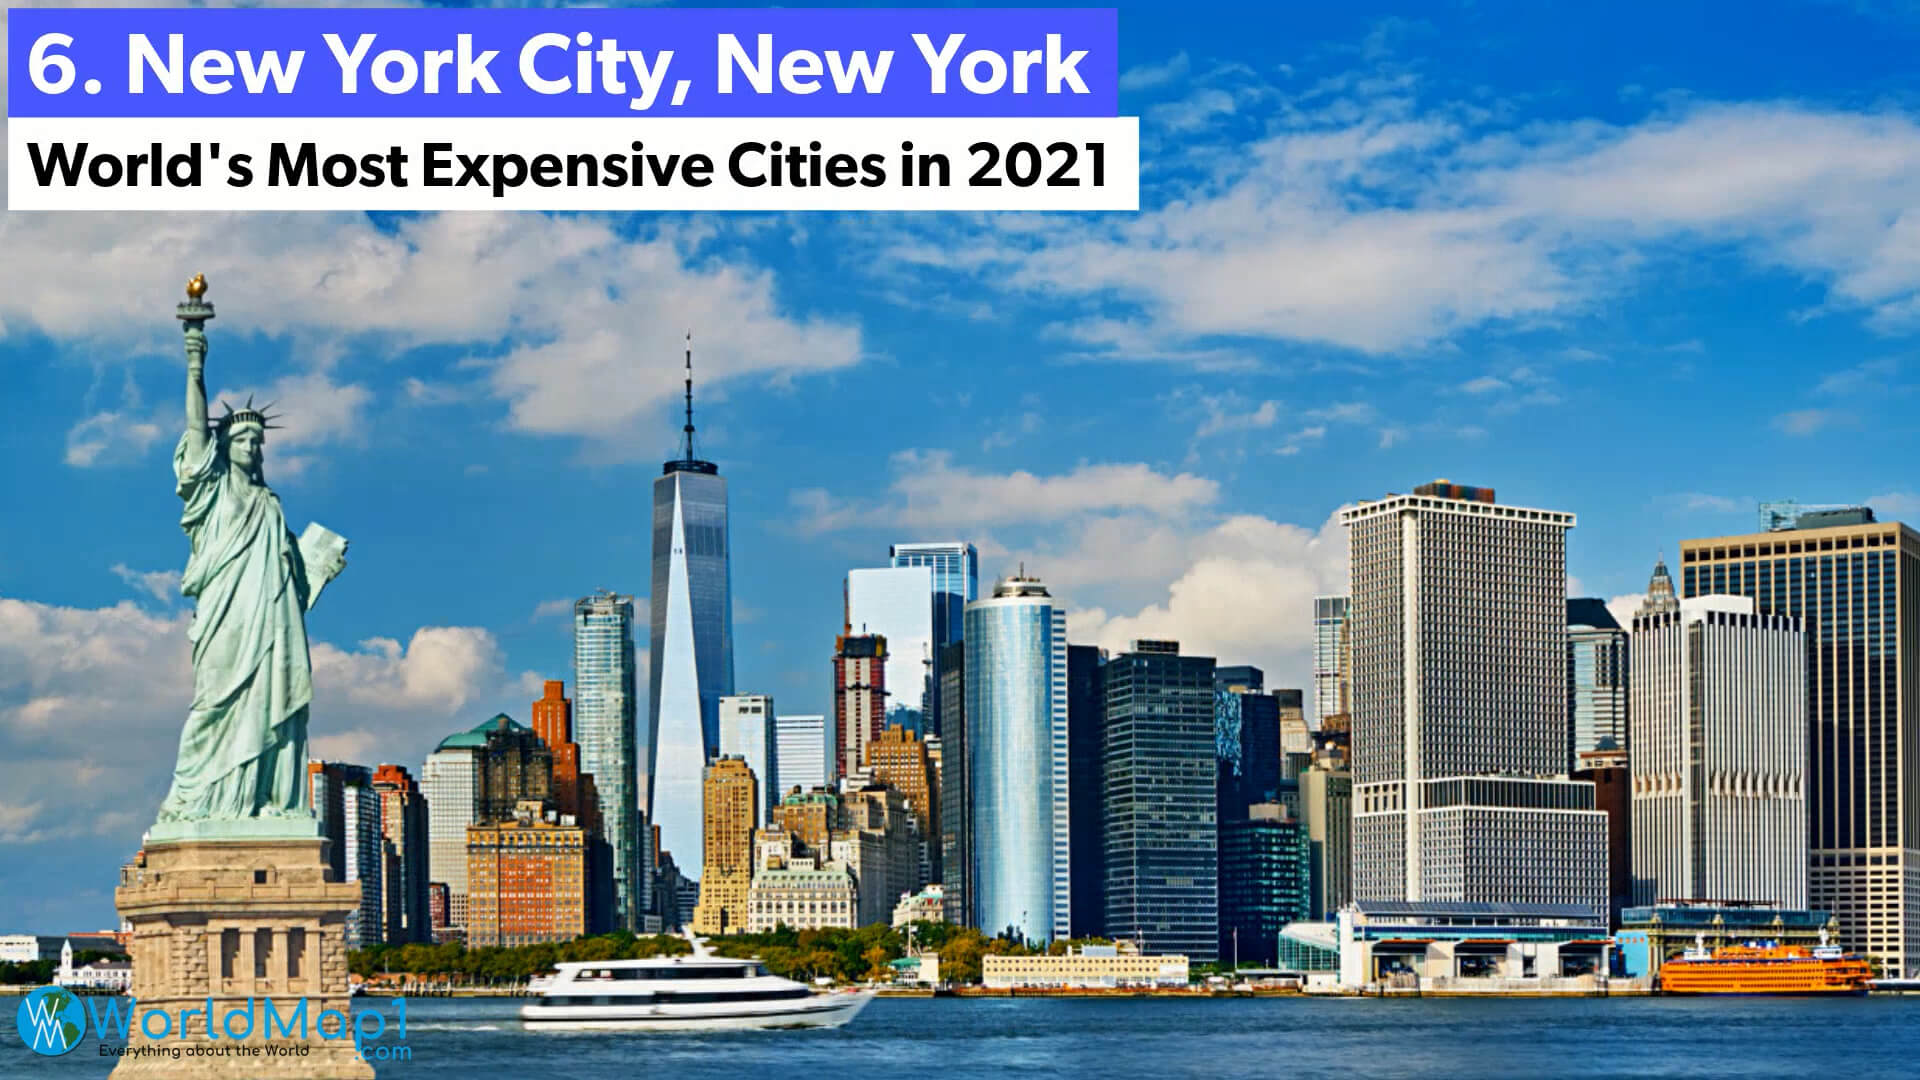 World's Most Expensive Cities - New York City, New York - US